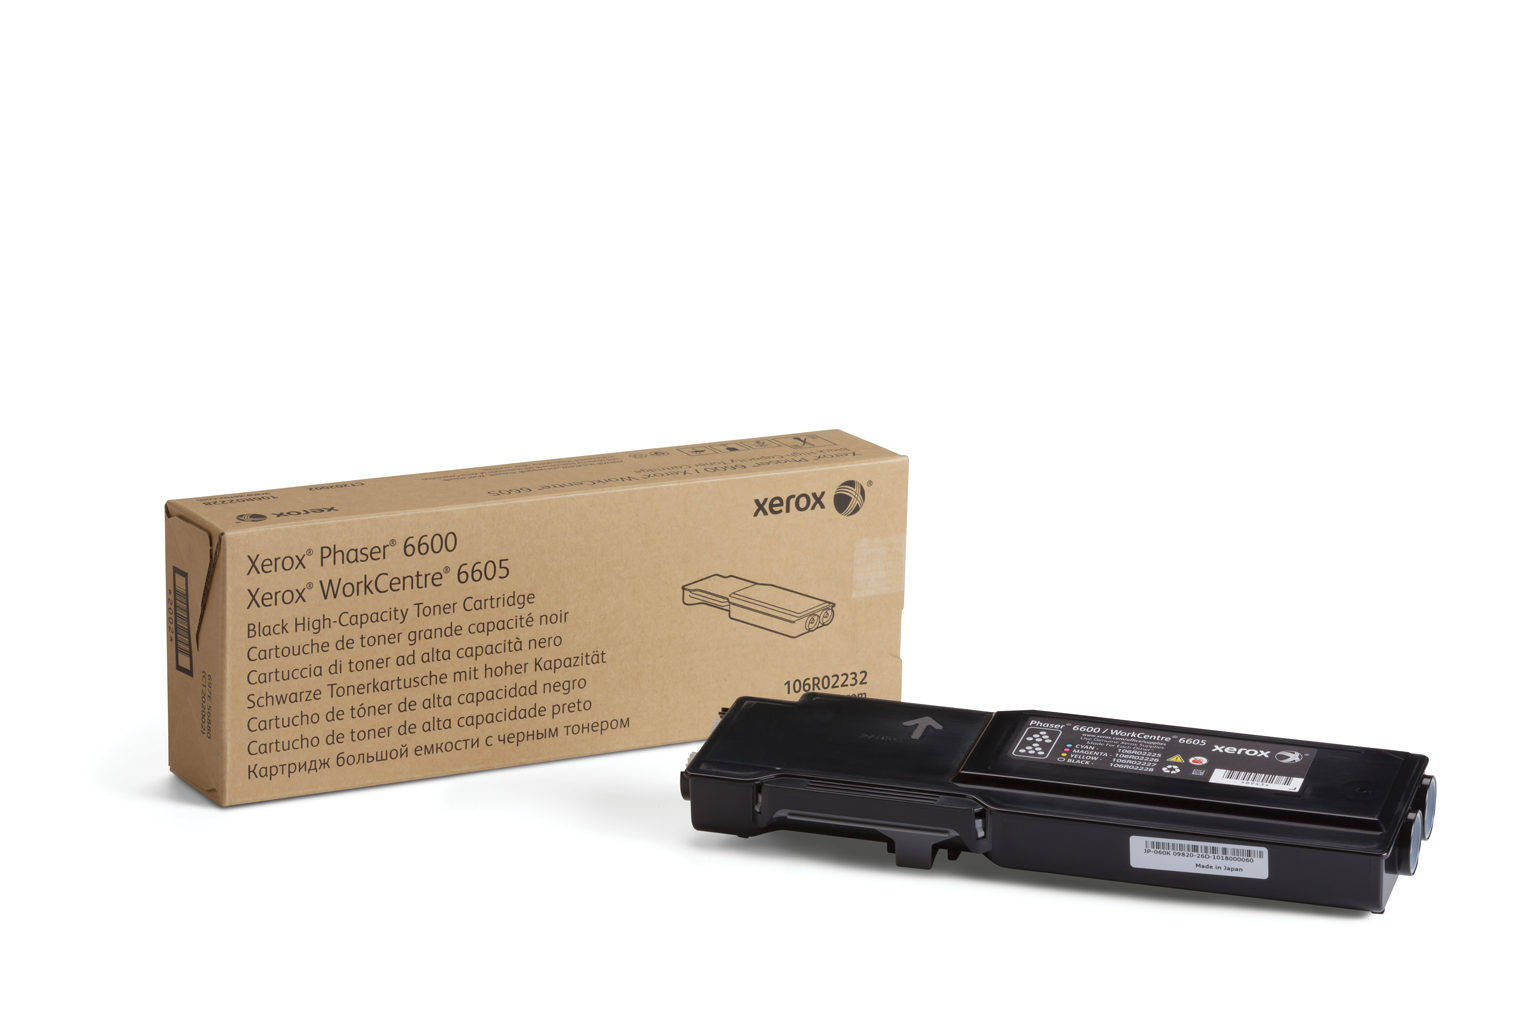 xerox Xerox Black High Capacity Toner Cartridge 8k Pages For 6600 Wc6605 - 106r02232 106r02232 - AD01